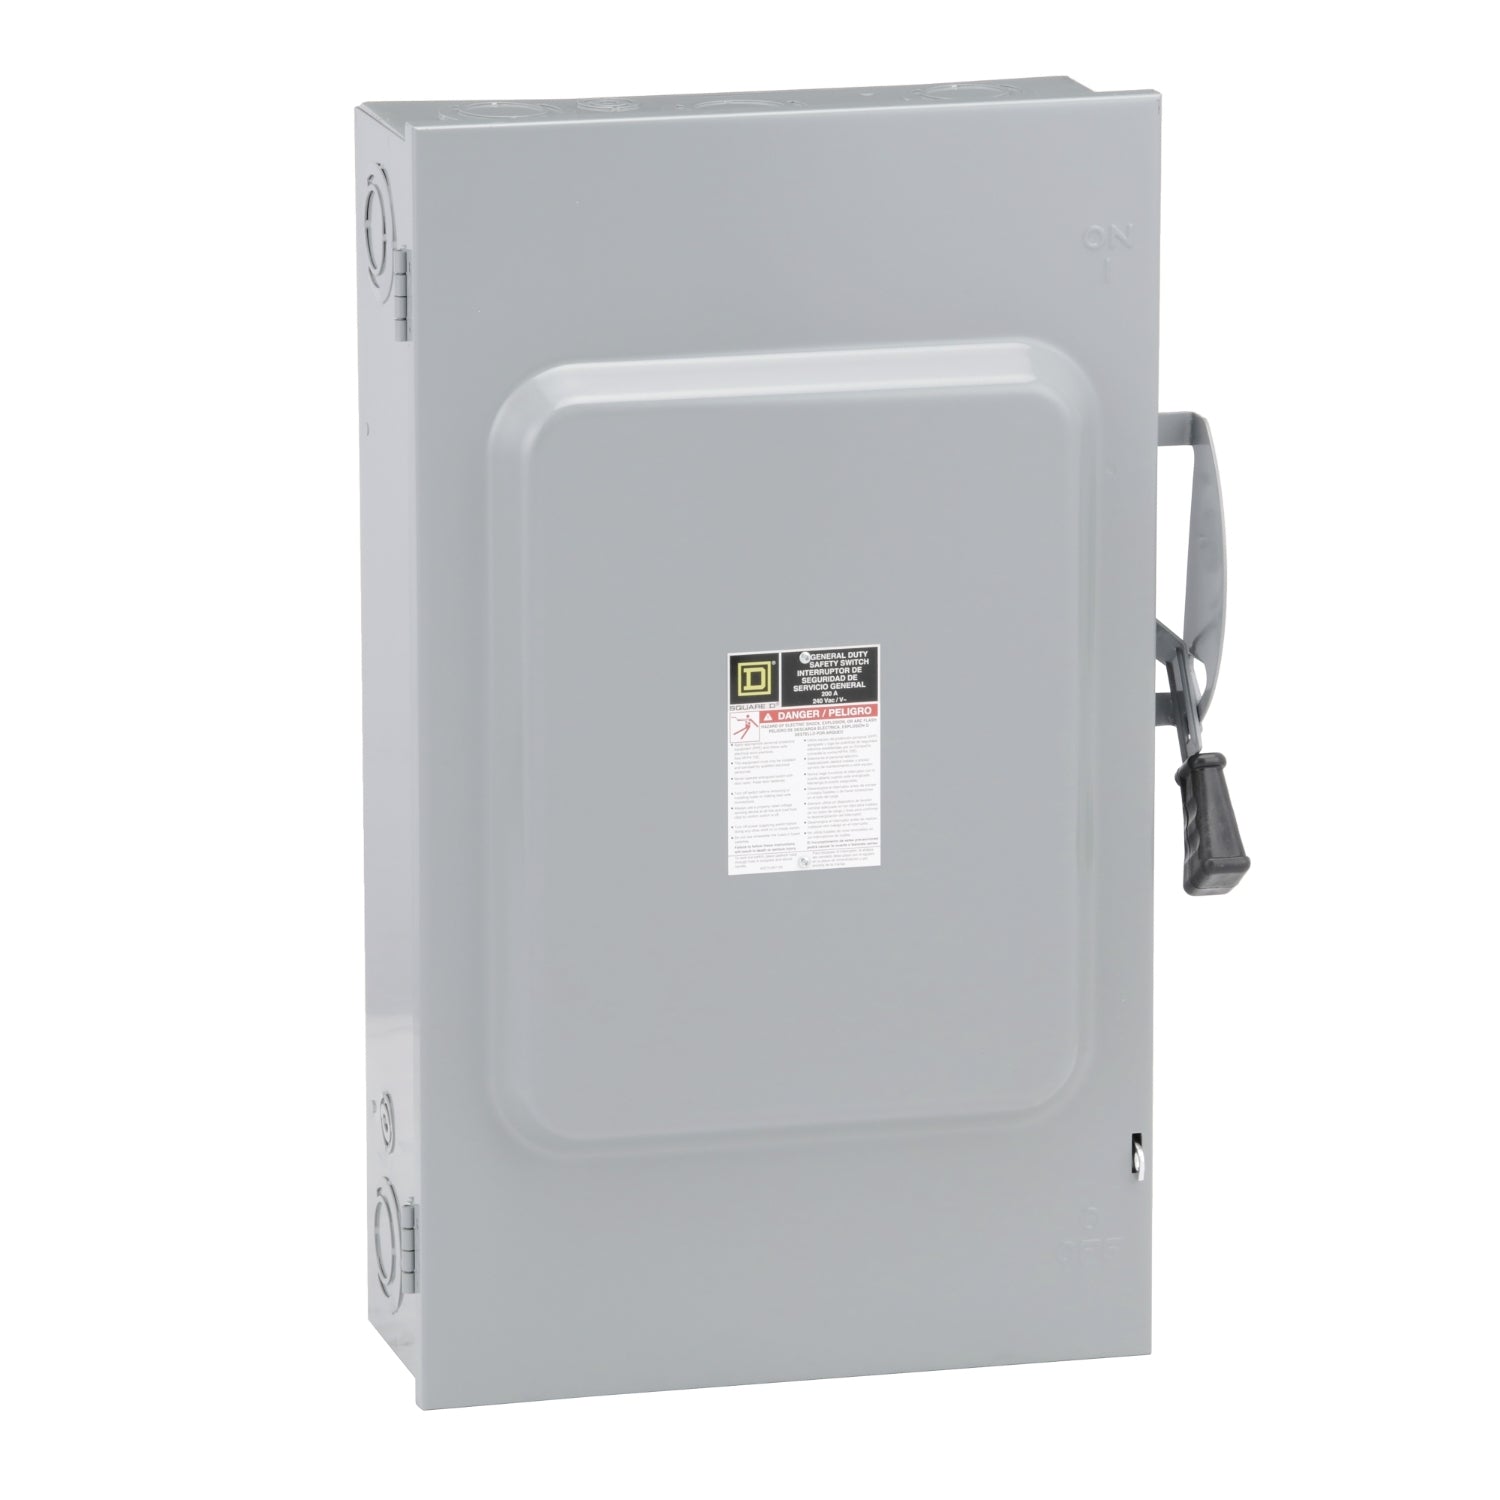 200A Safety Switch - D324N